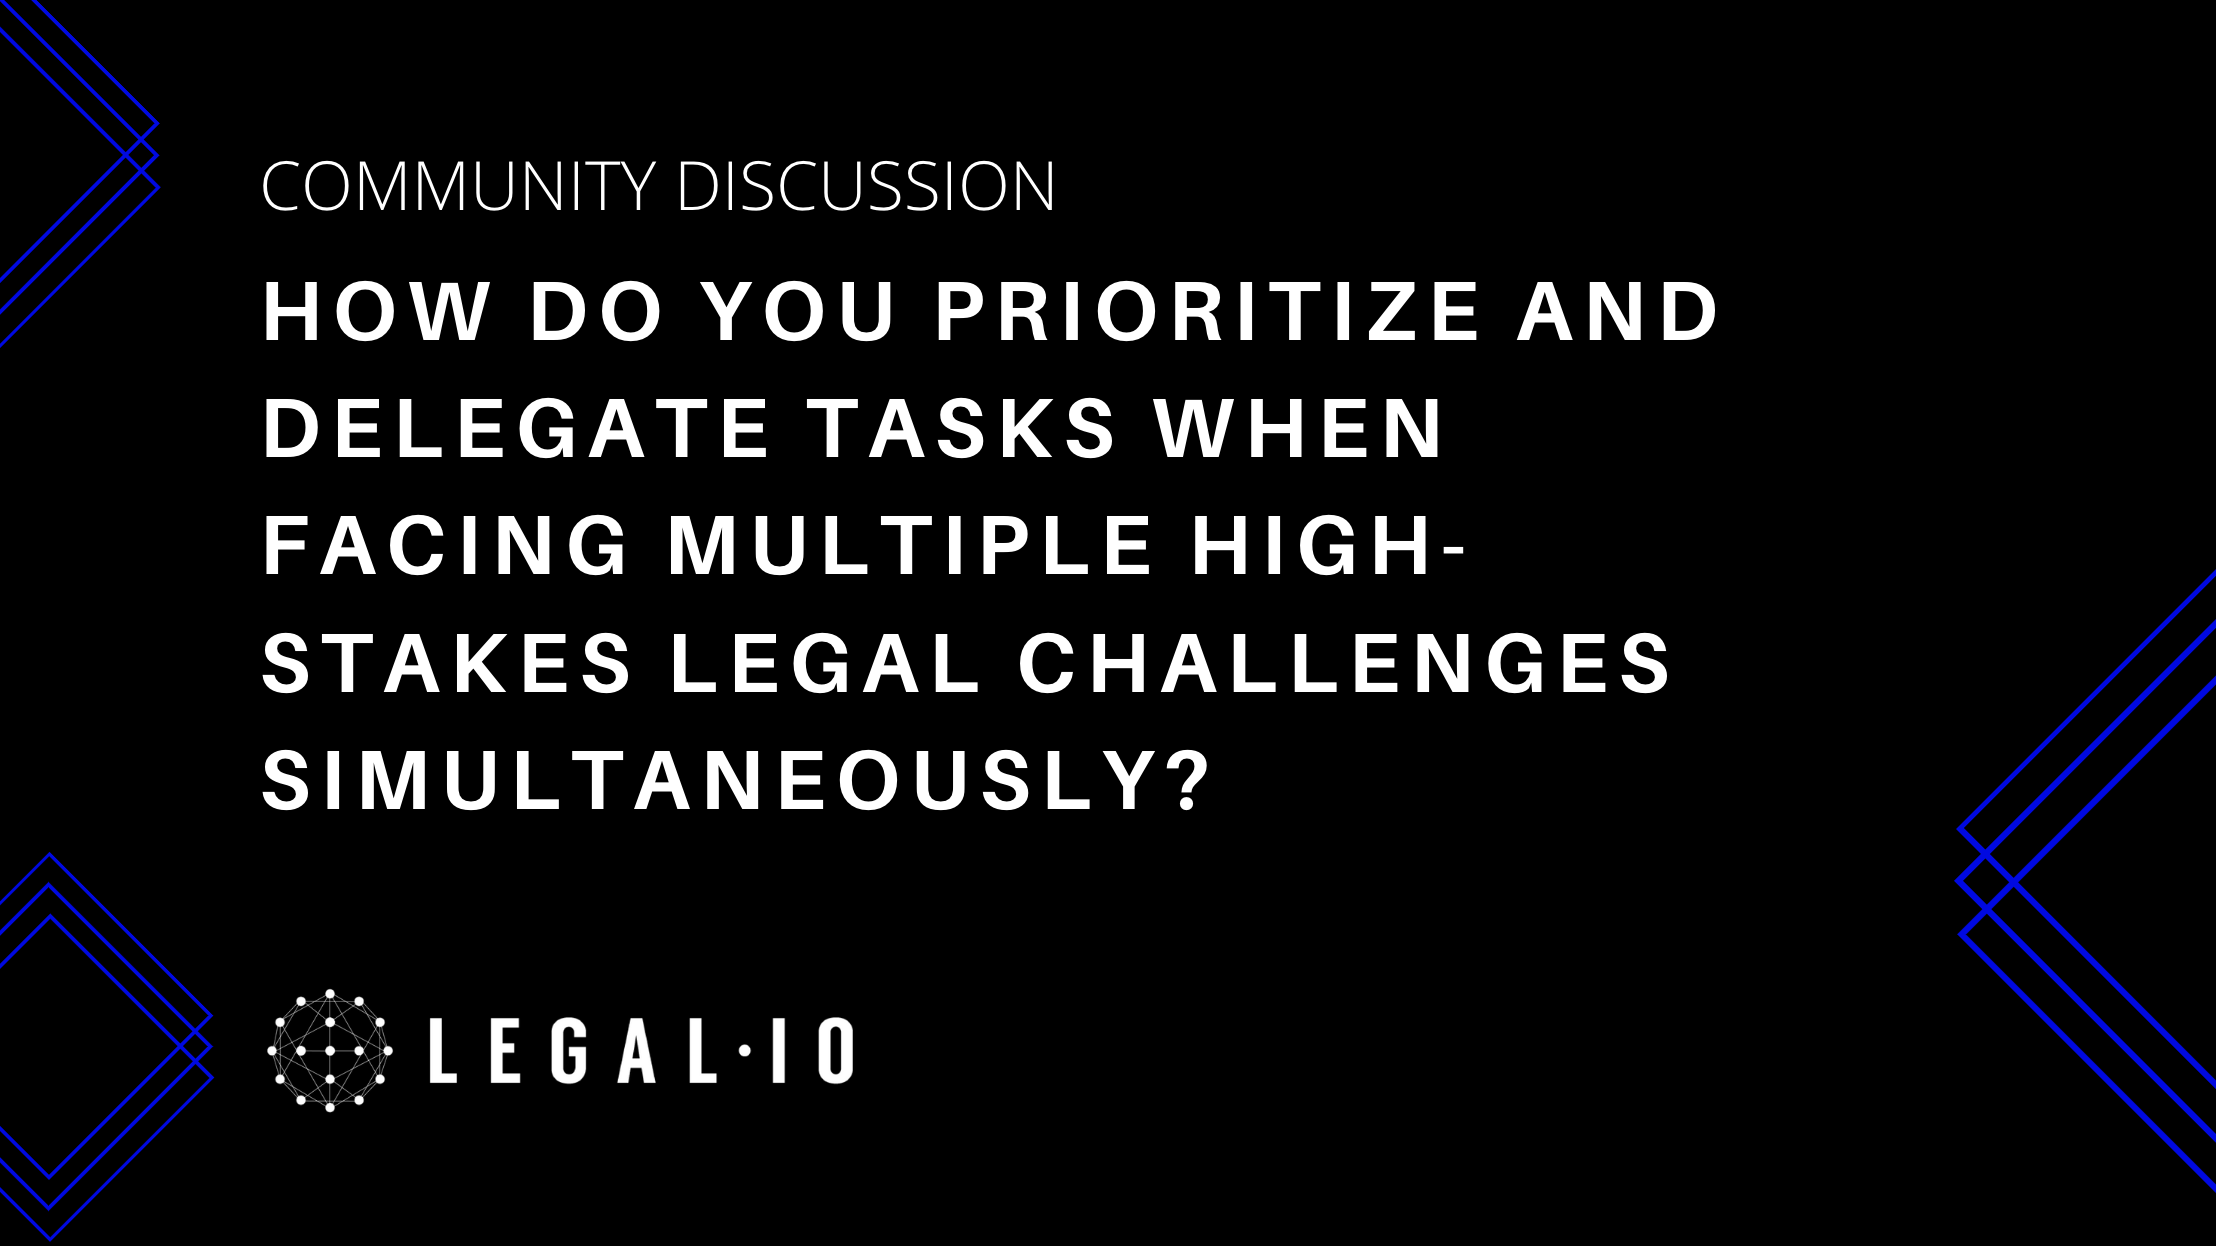 Community Discussion: How do you prioritize and delegate tasks when facing multiple high-stakes legal challenges simultaneously?